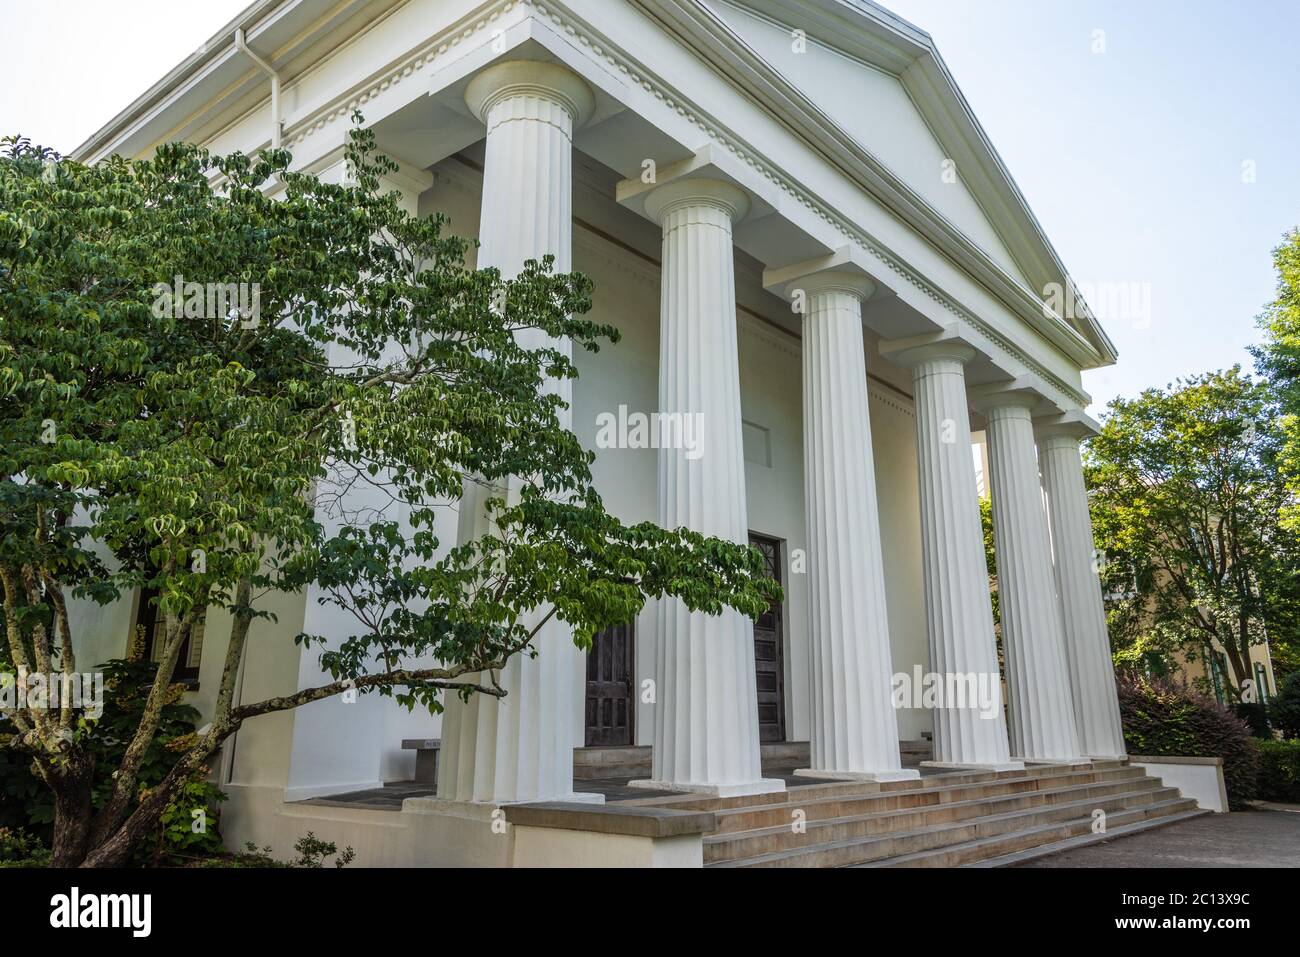 The Chapel, a 19th century landmark, built in 1832 in the Greek Revival architectural style, on the campus of the University of Georgia in Athens, GA. Stock Photo